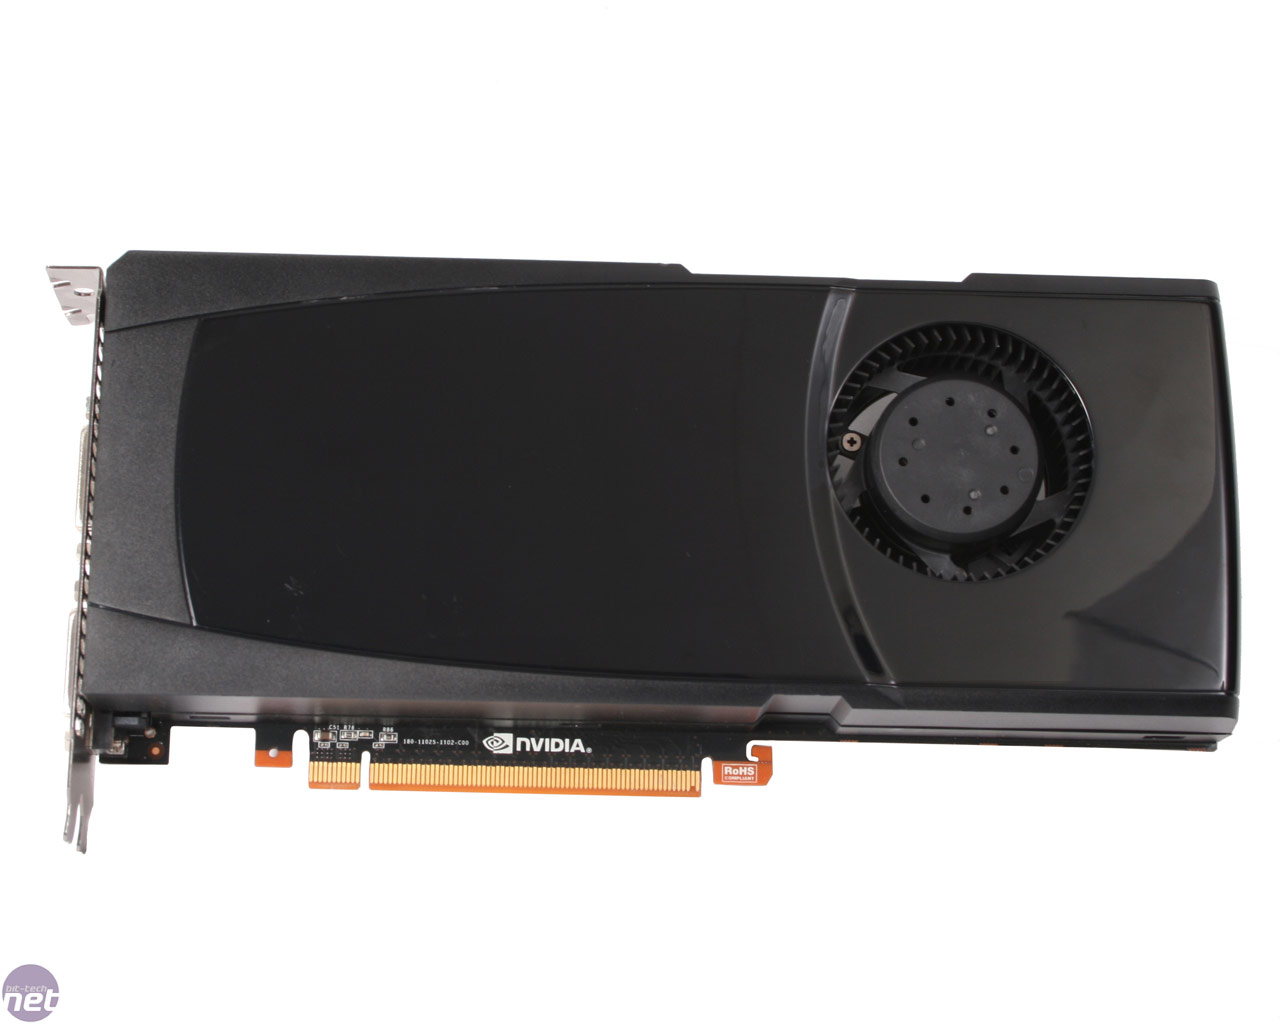 Nvidia GeForce GTX 470 1,280MB Review 